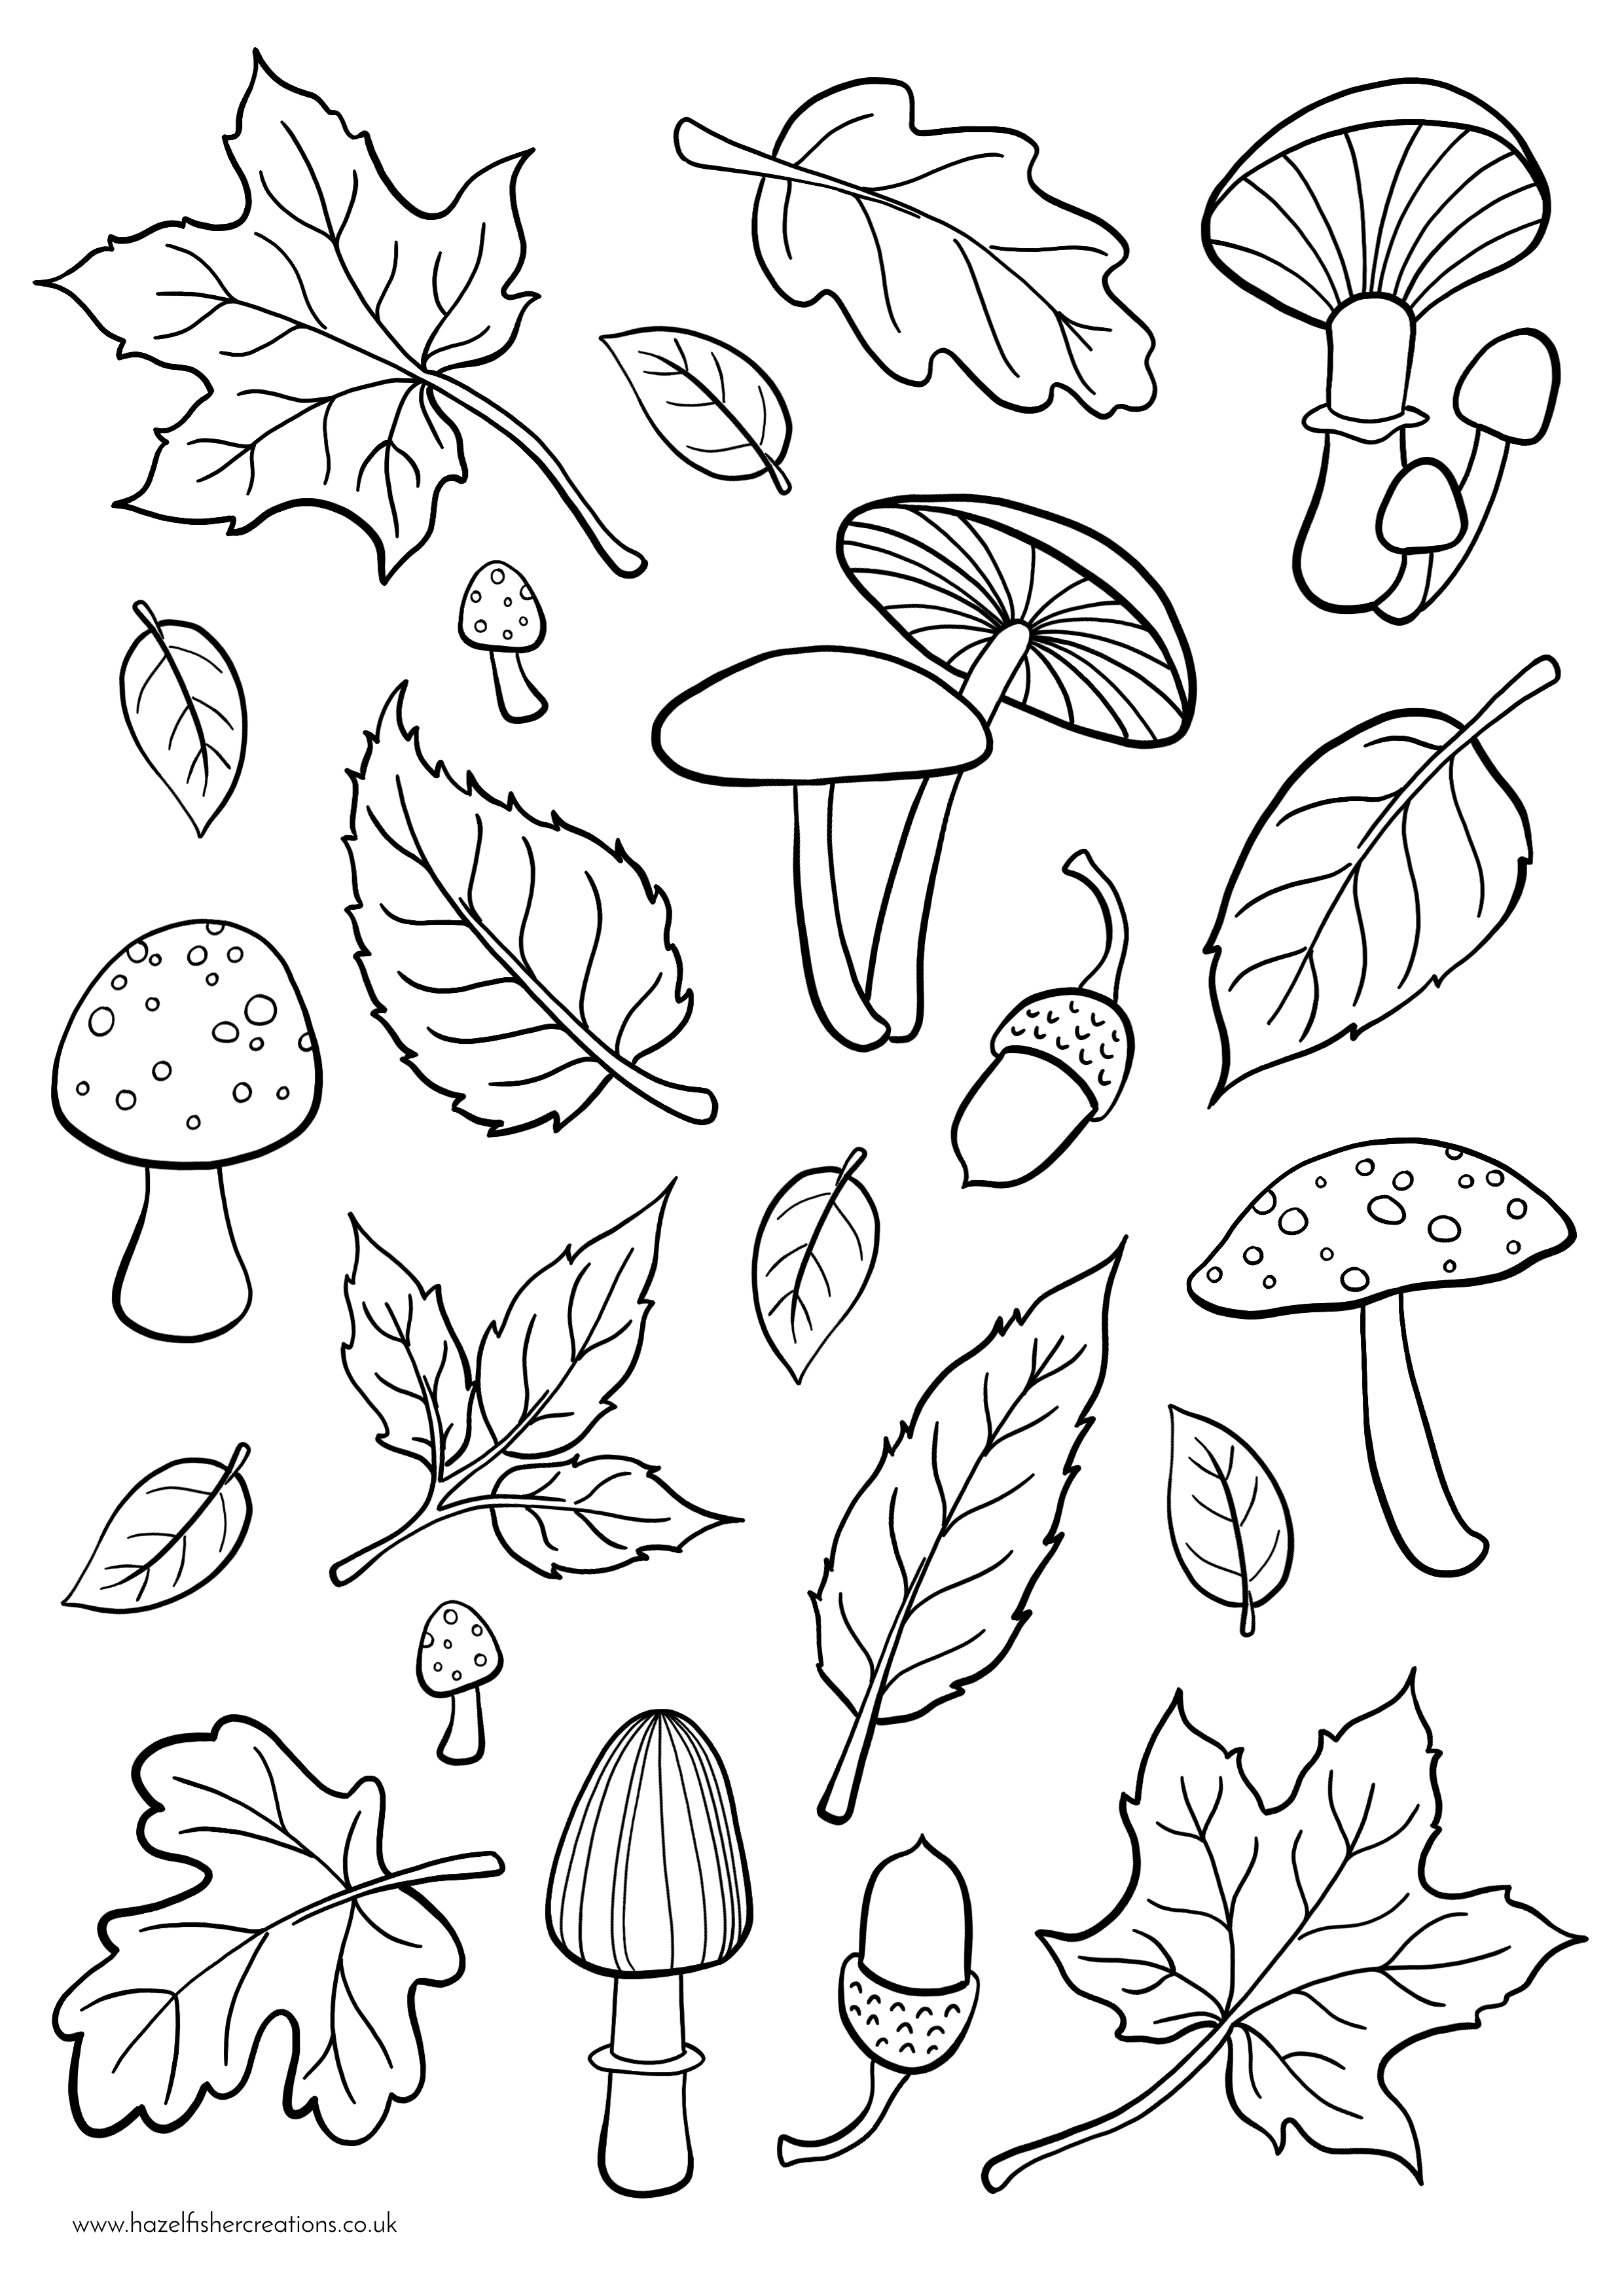 Autumn Colouring In Activity Sheet  image